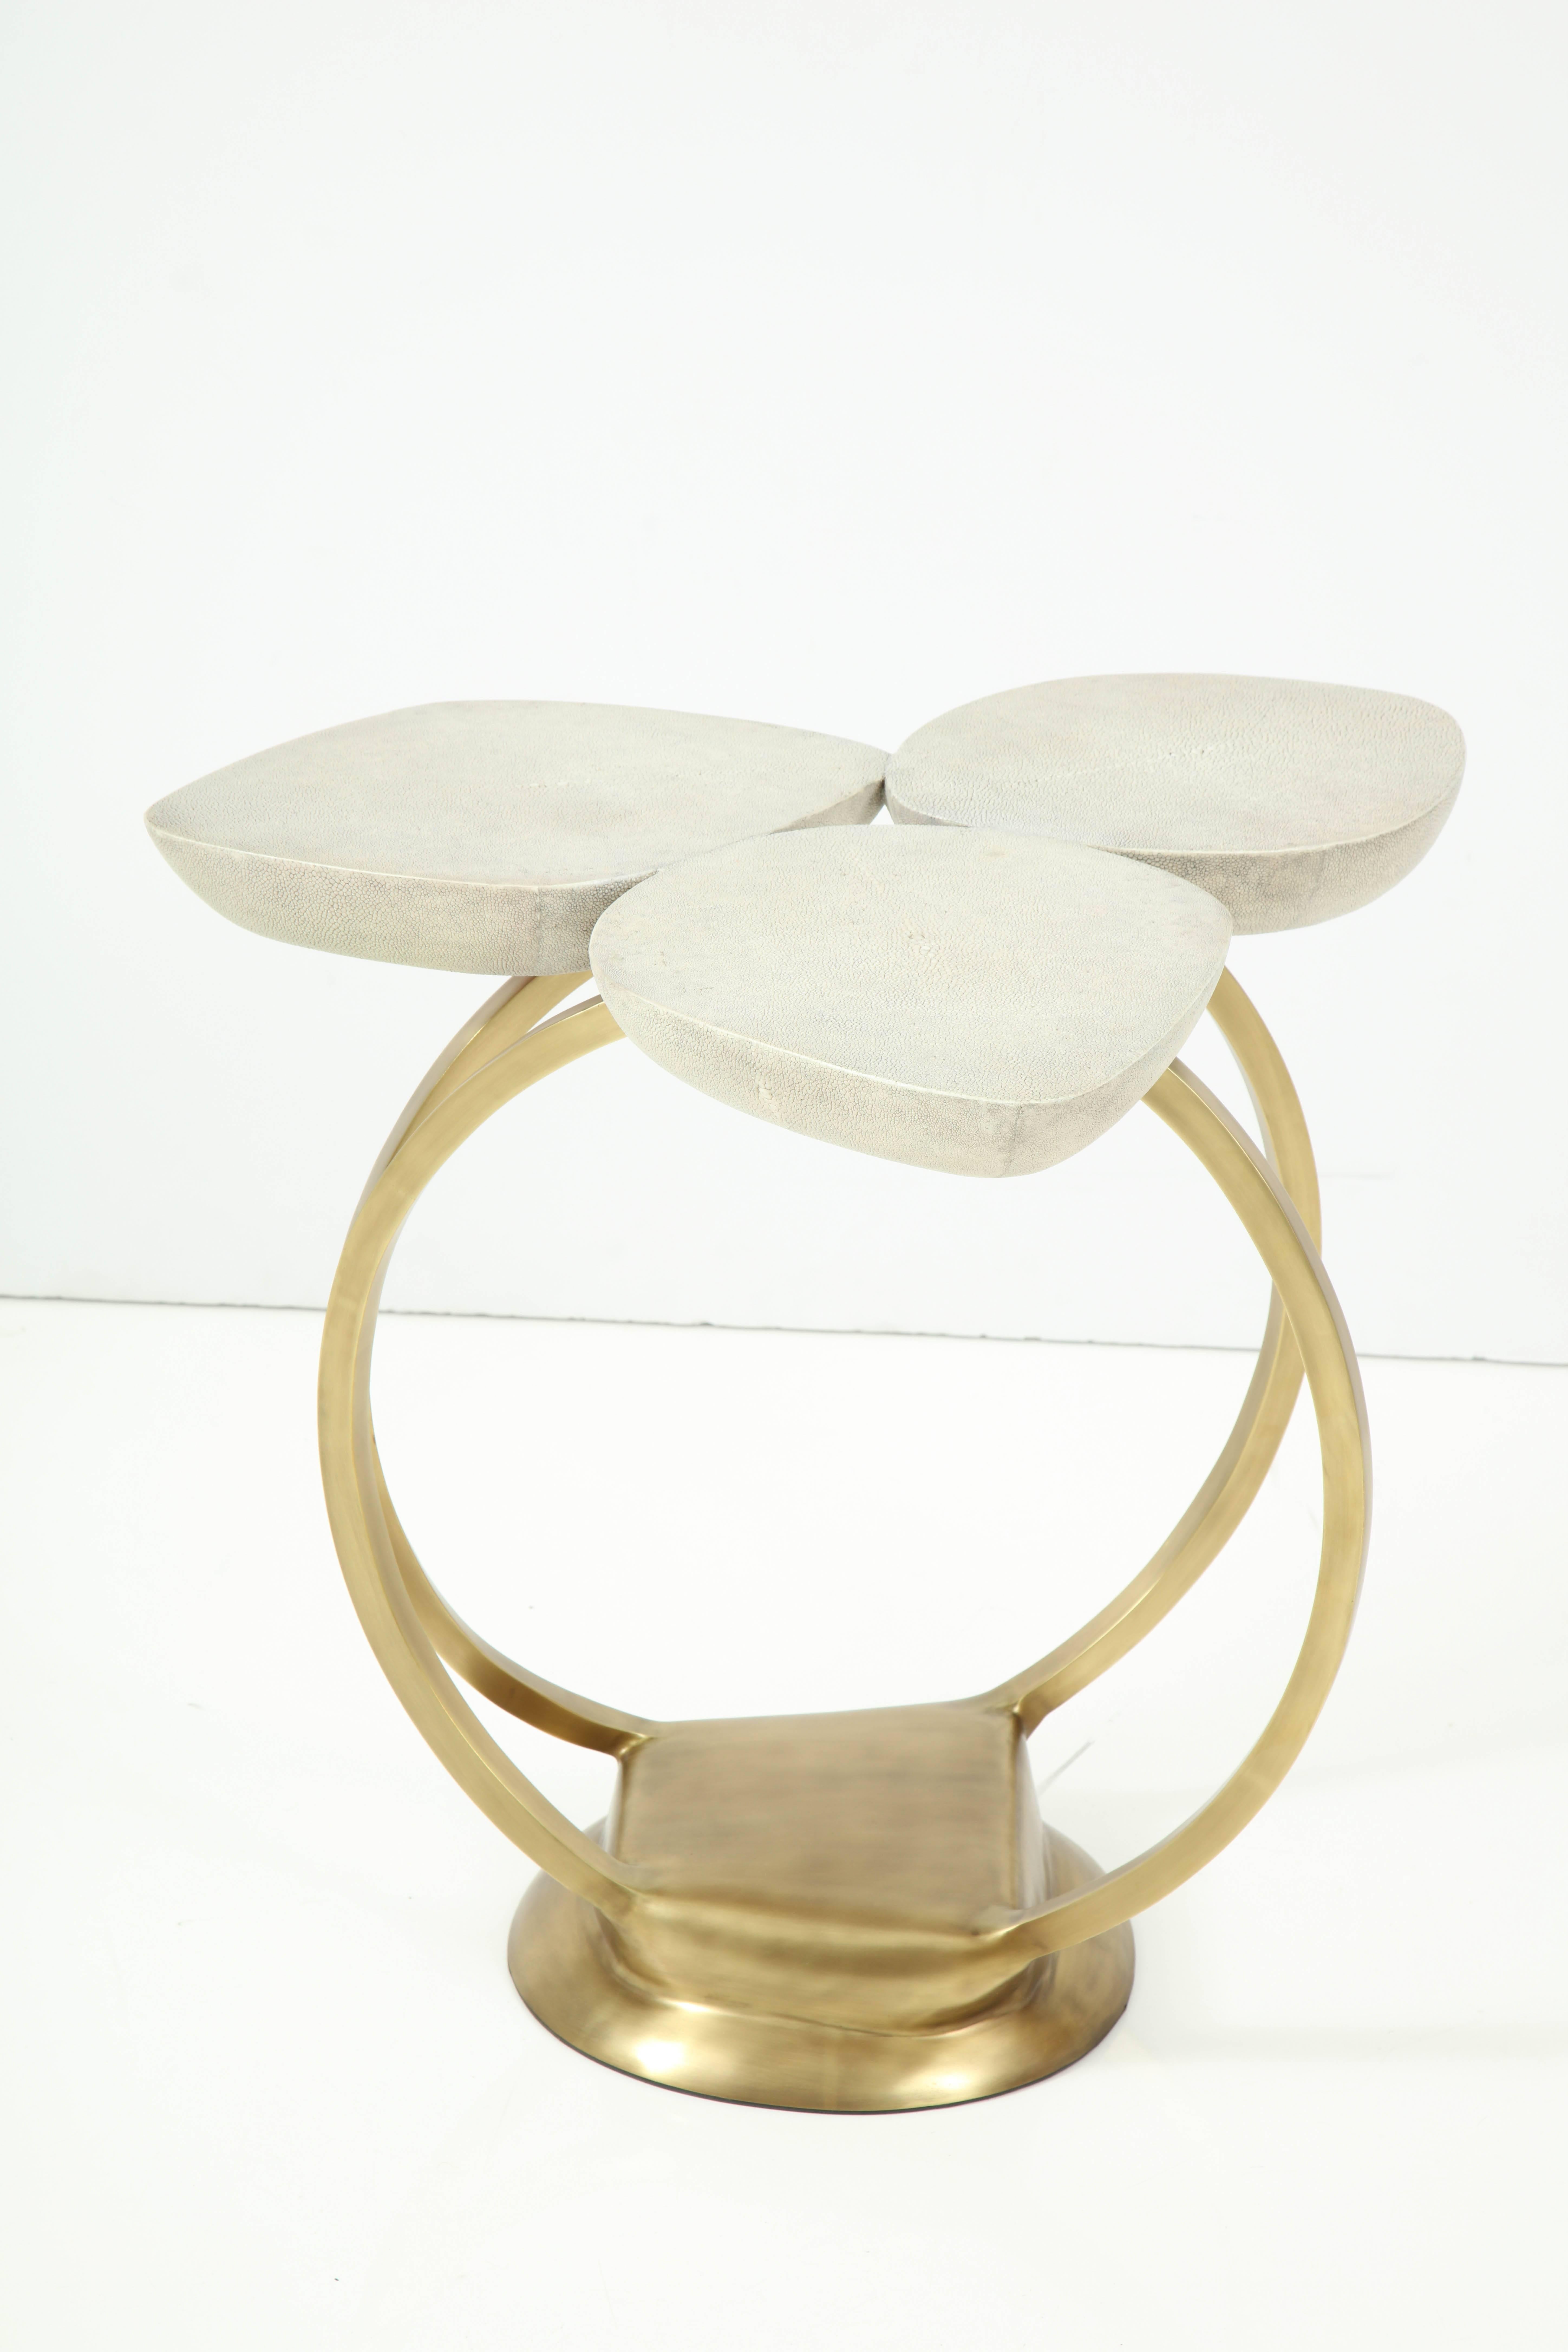 Modern Shagreen Side Table with Brass Base, Cream Shagreen, Contemporary, Floral Design For Sale